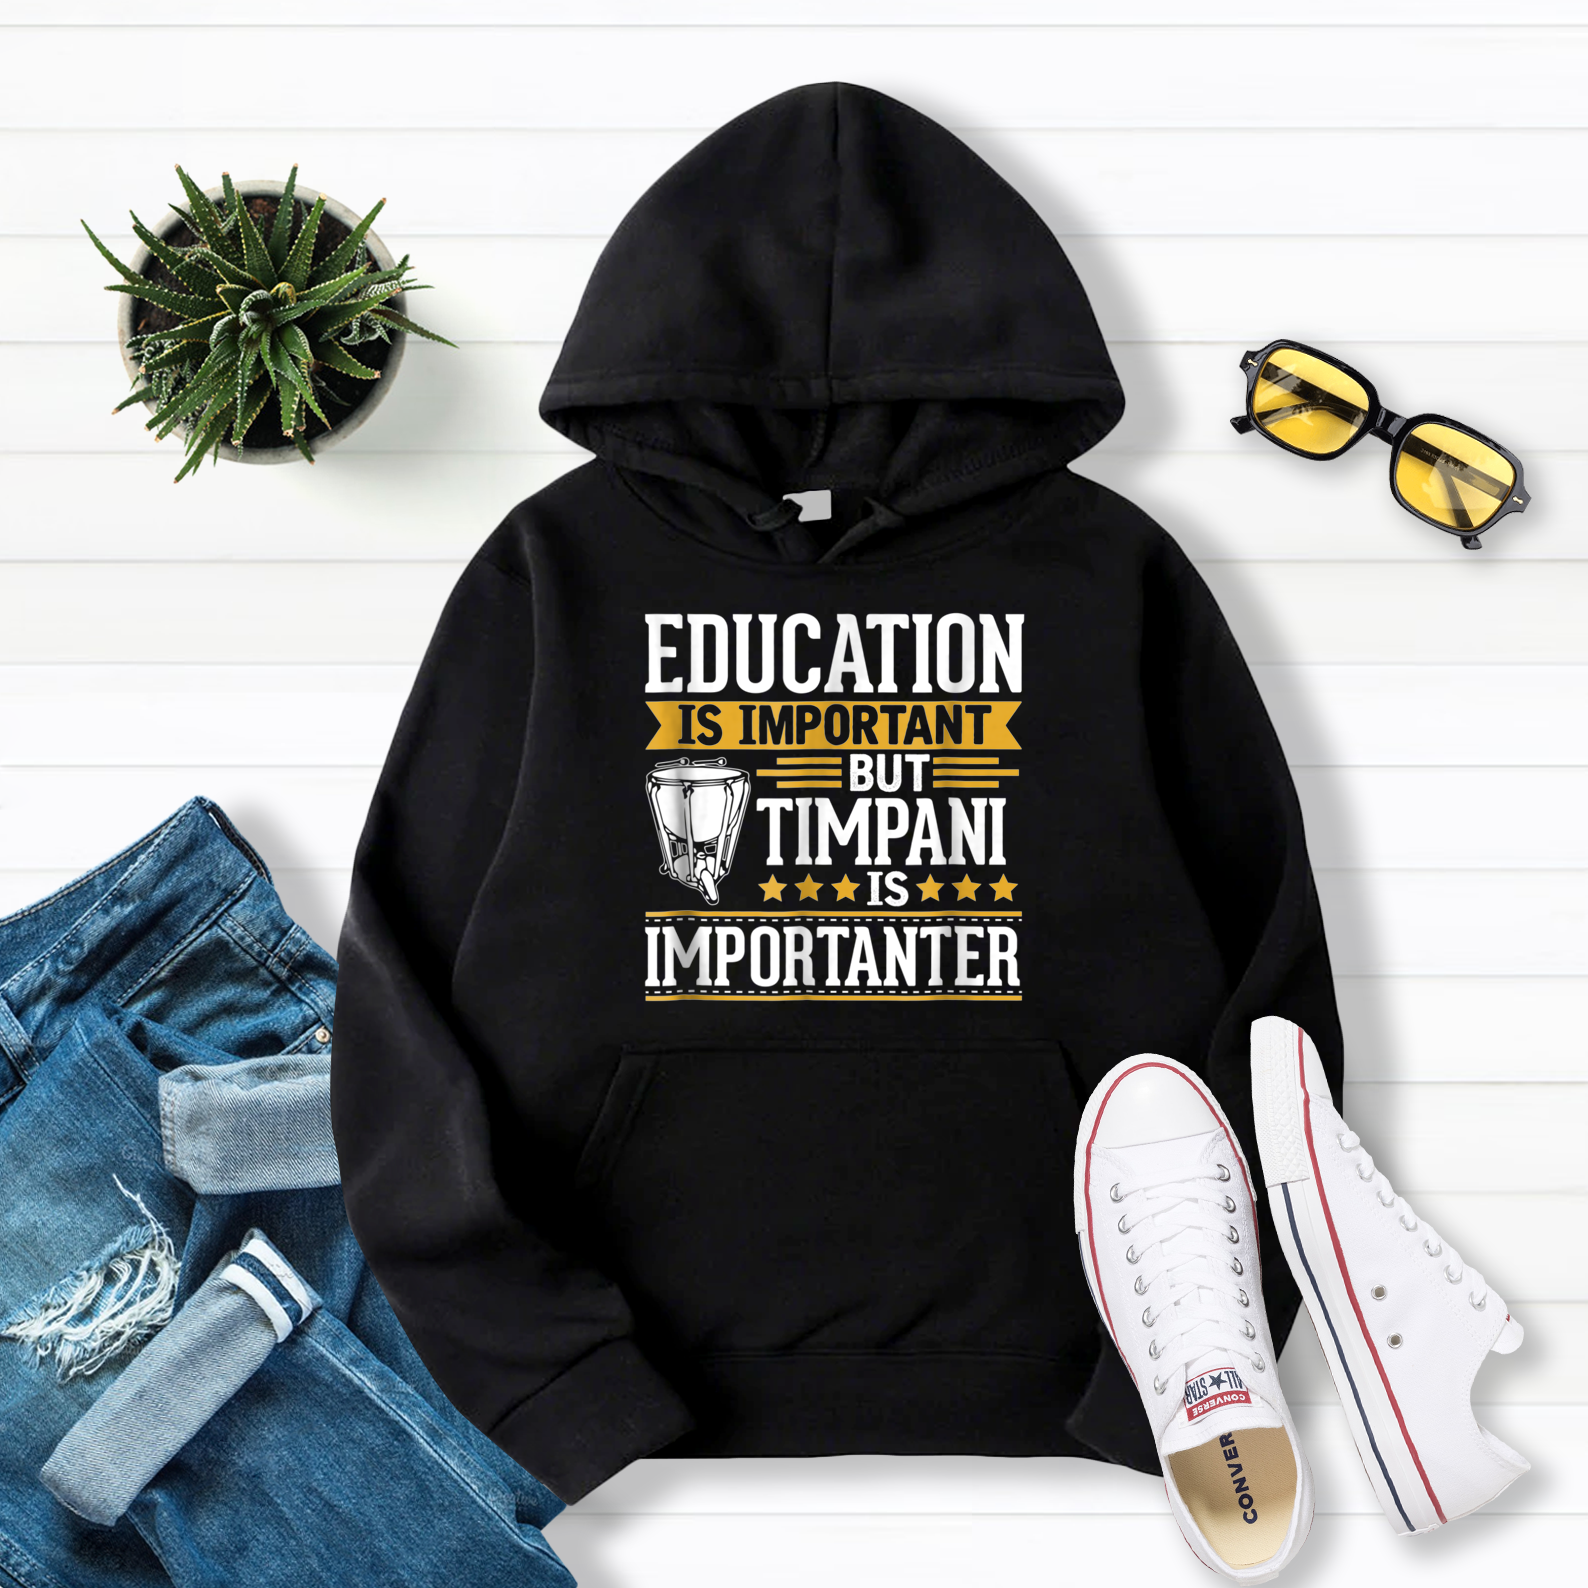 Timpani Is Importanter Than Education V1 Pullover Hoodie Black S-5XL